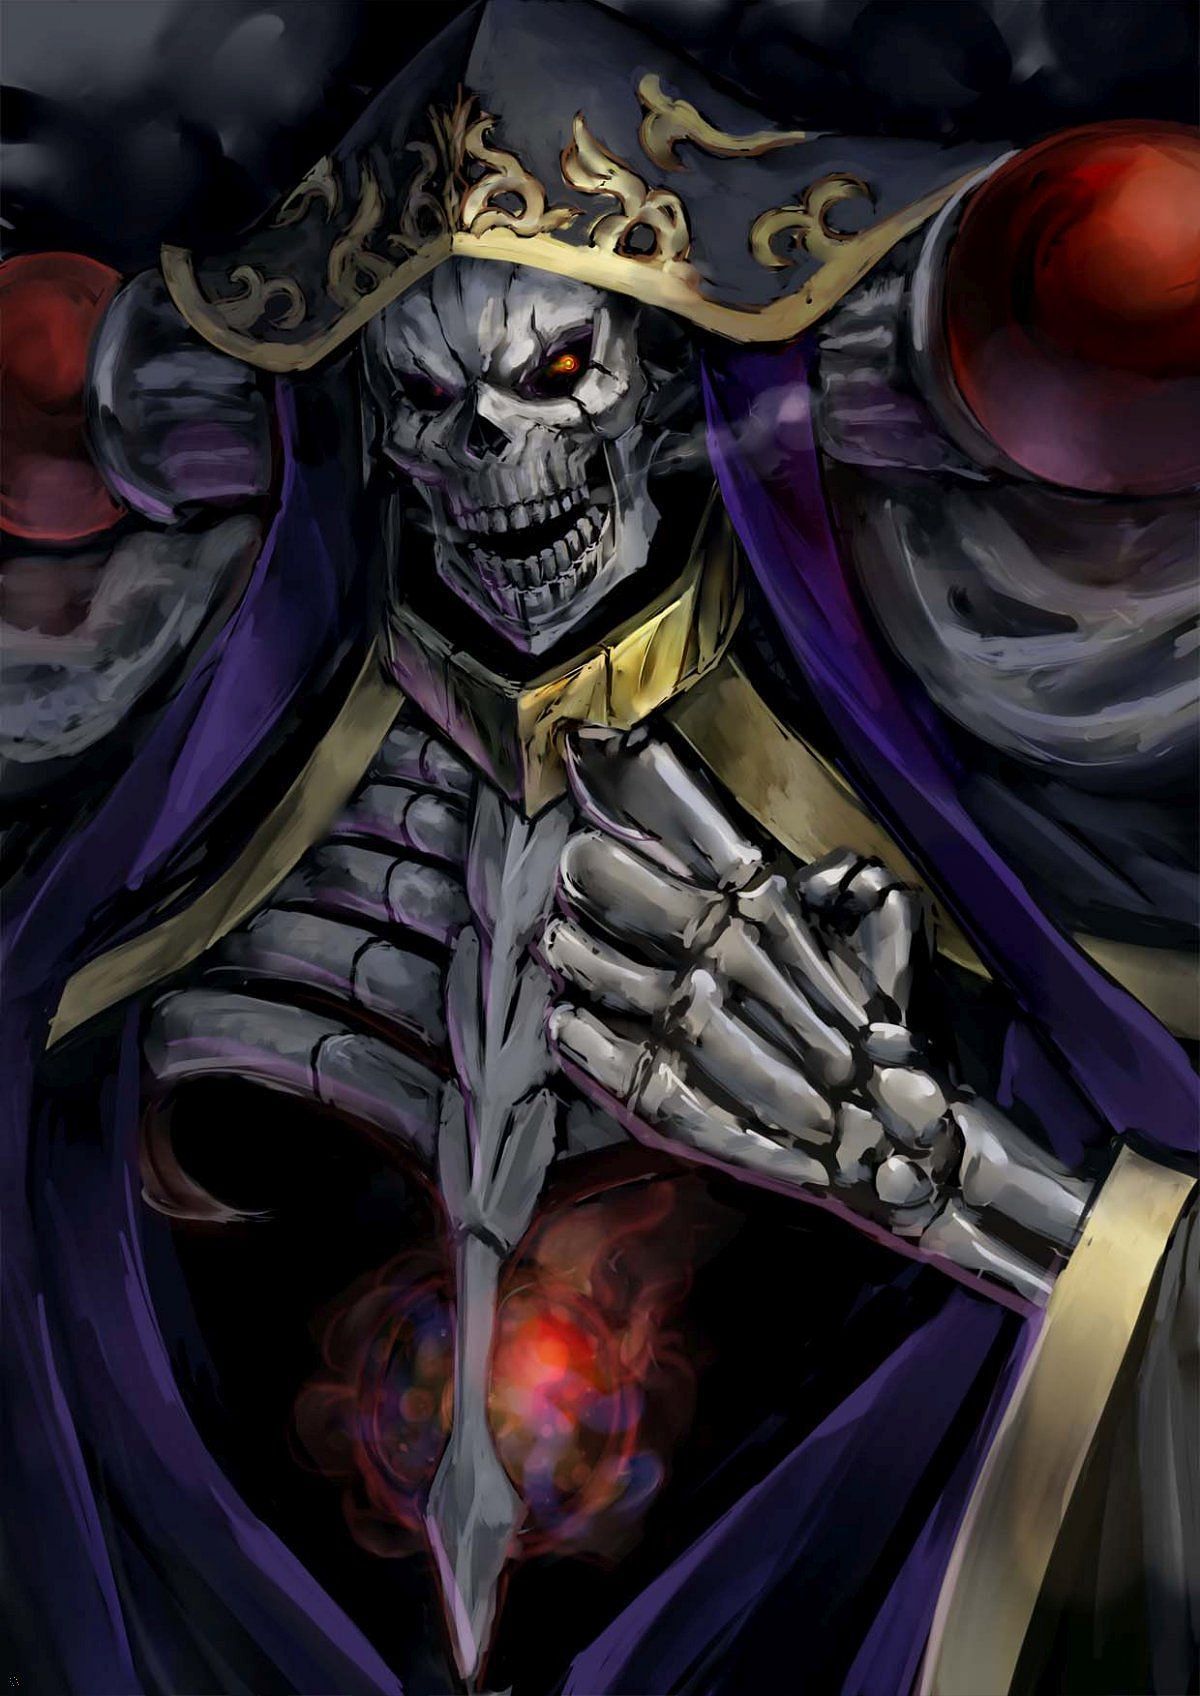 Momonga, the master of the dark guild, Ainz Ooal Gown in Overlord (Image via Pinterest/ Shimashima)